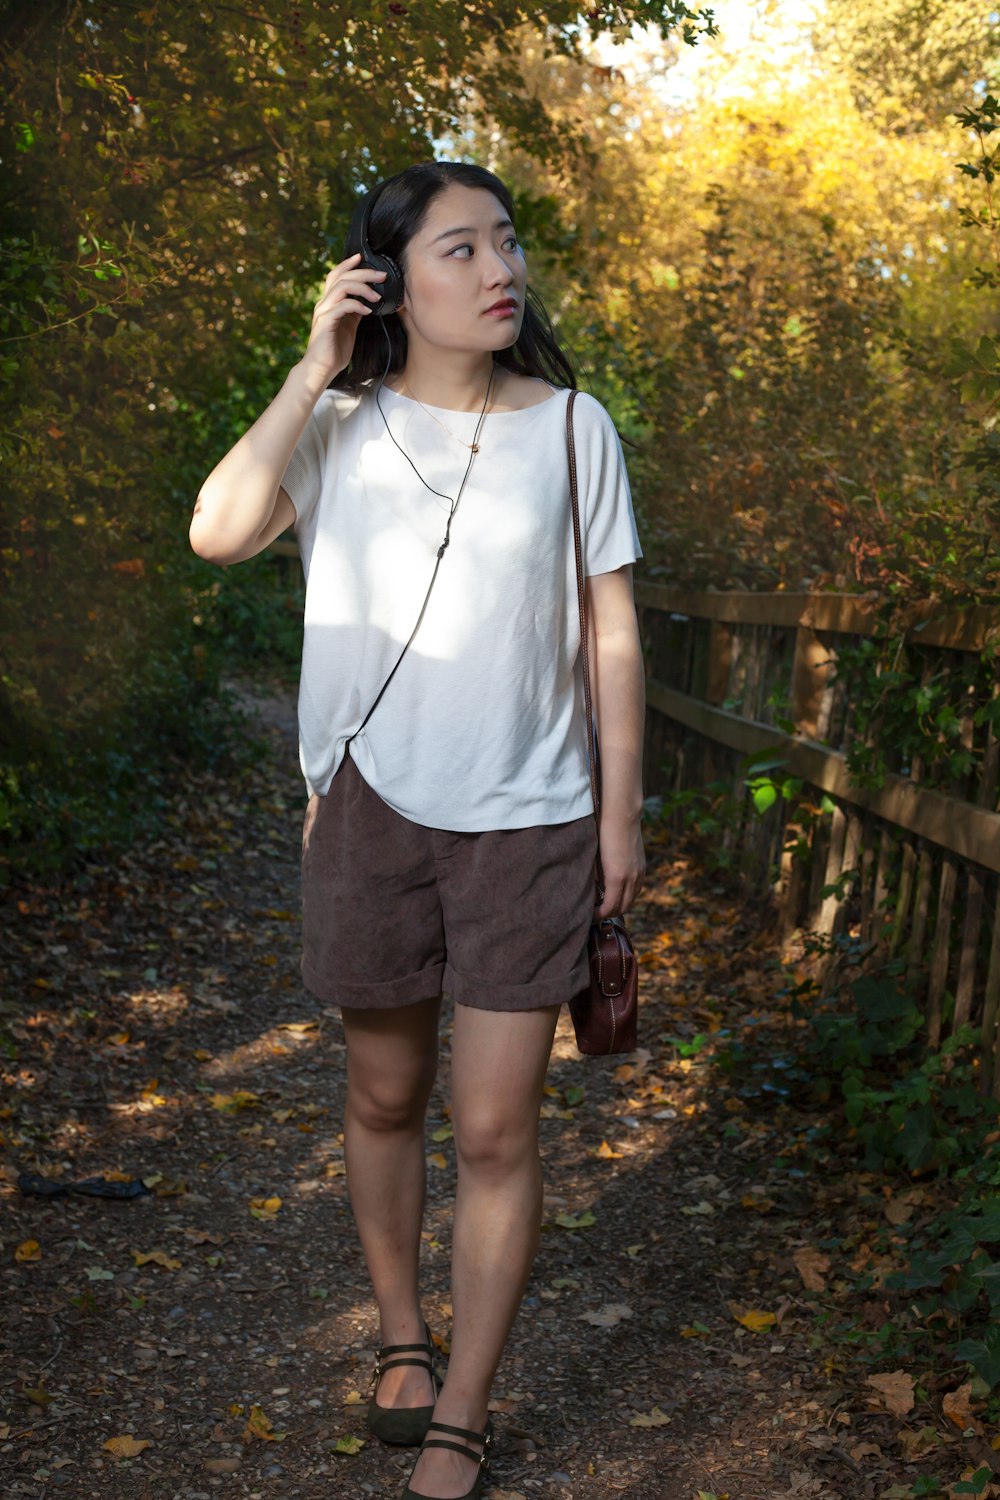 Woman in white shirt and brown shorts standing on pathway photo – Free  Clothing Image on Unsplash